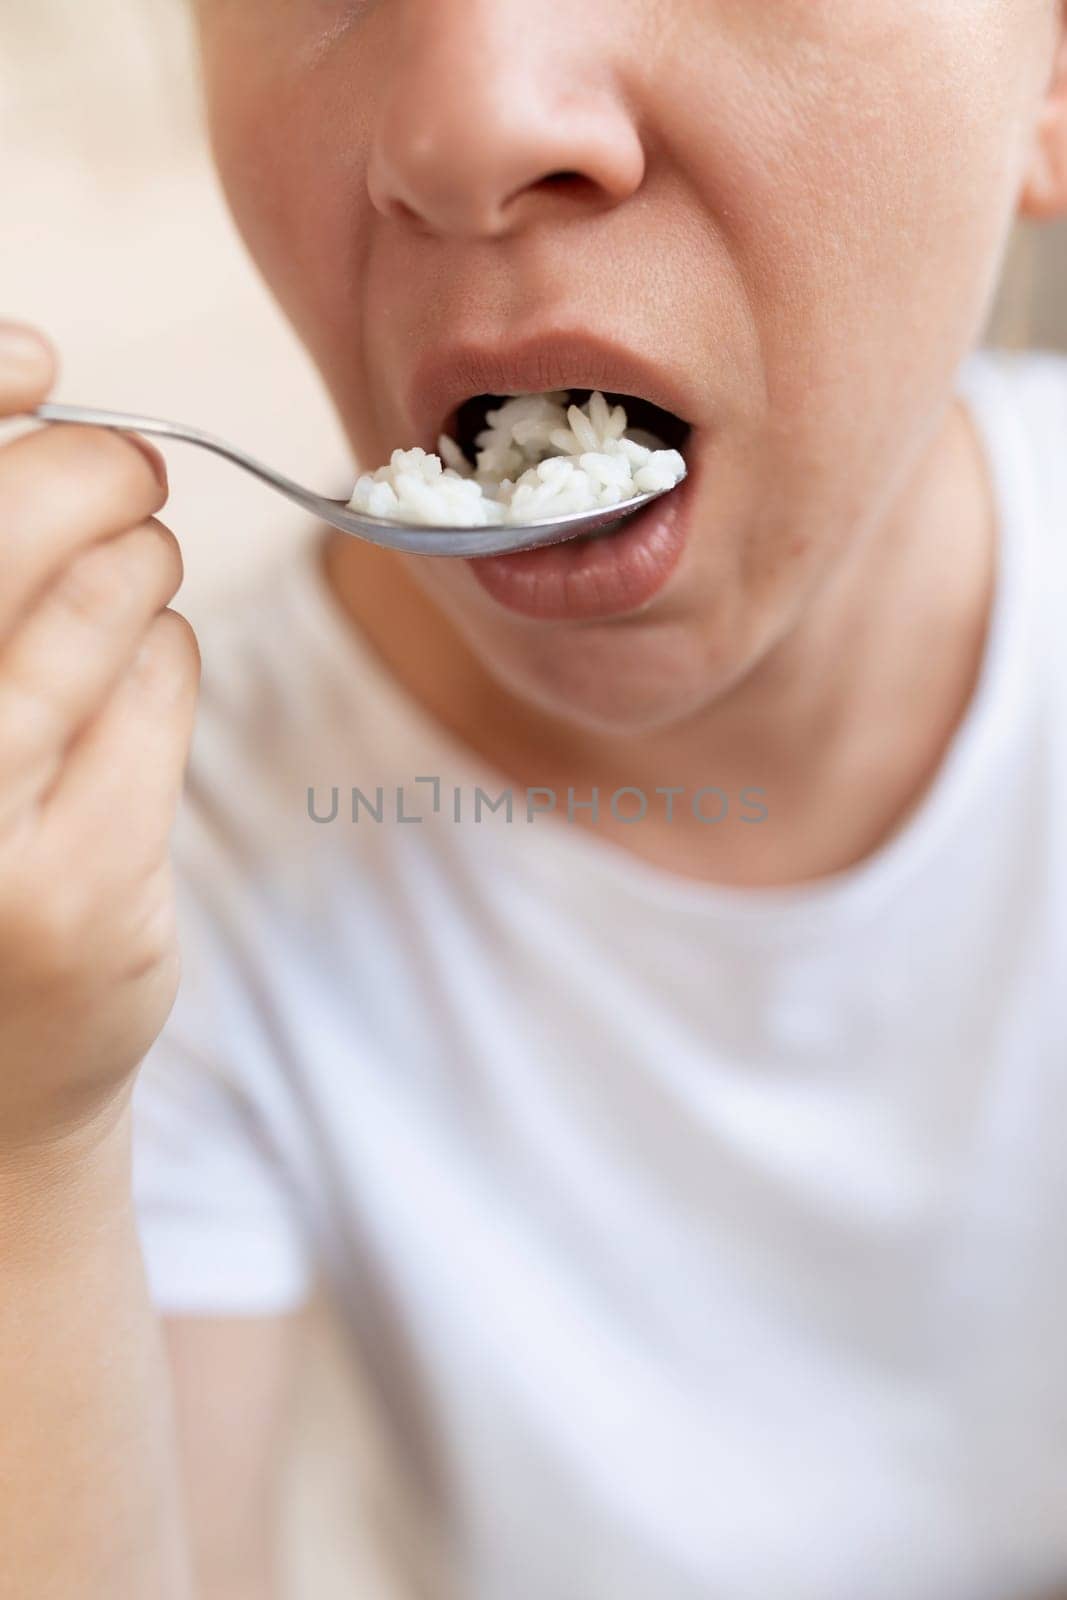 a woman stuffs a spoonful of rice into her mouth. concept of proper nutrition.